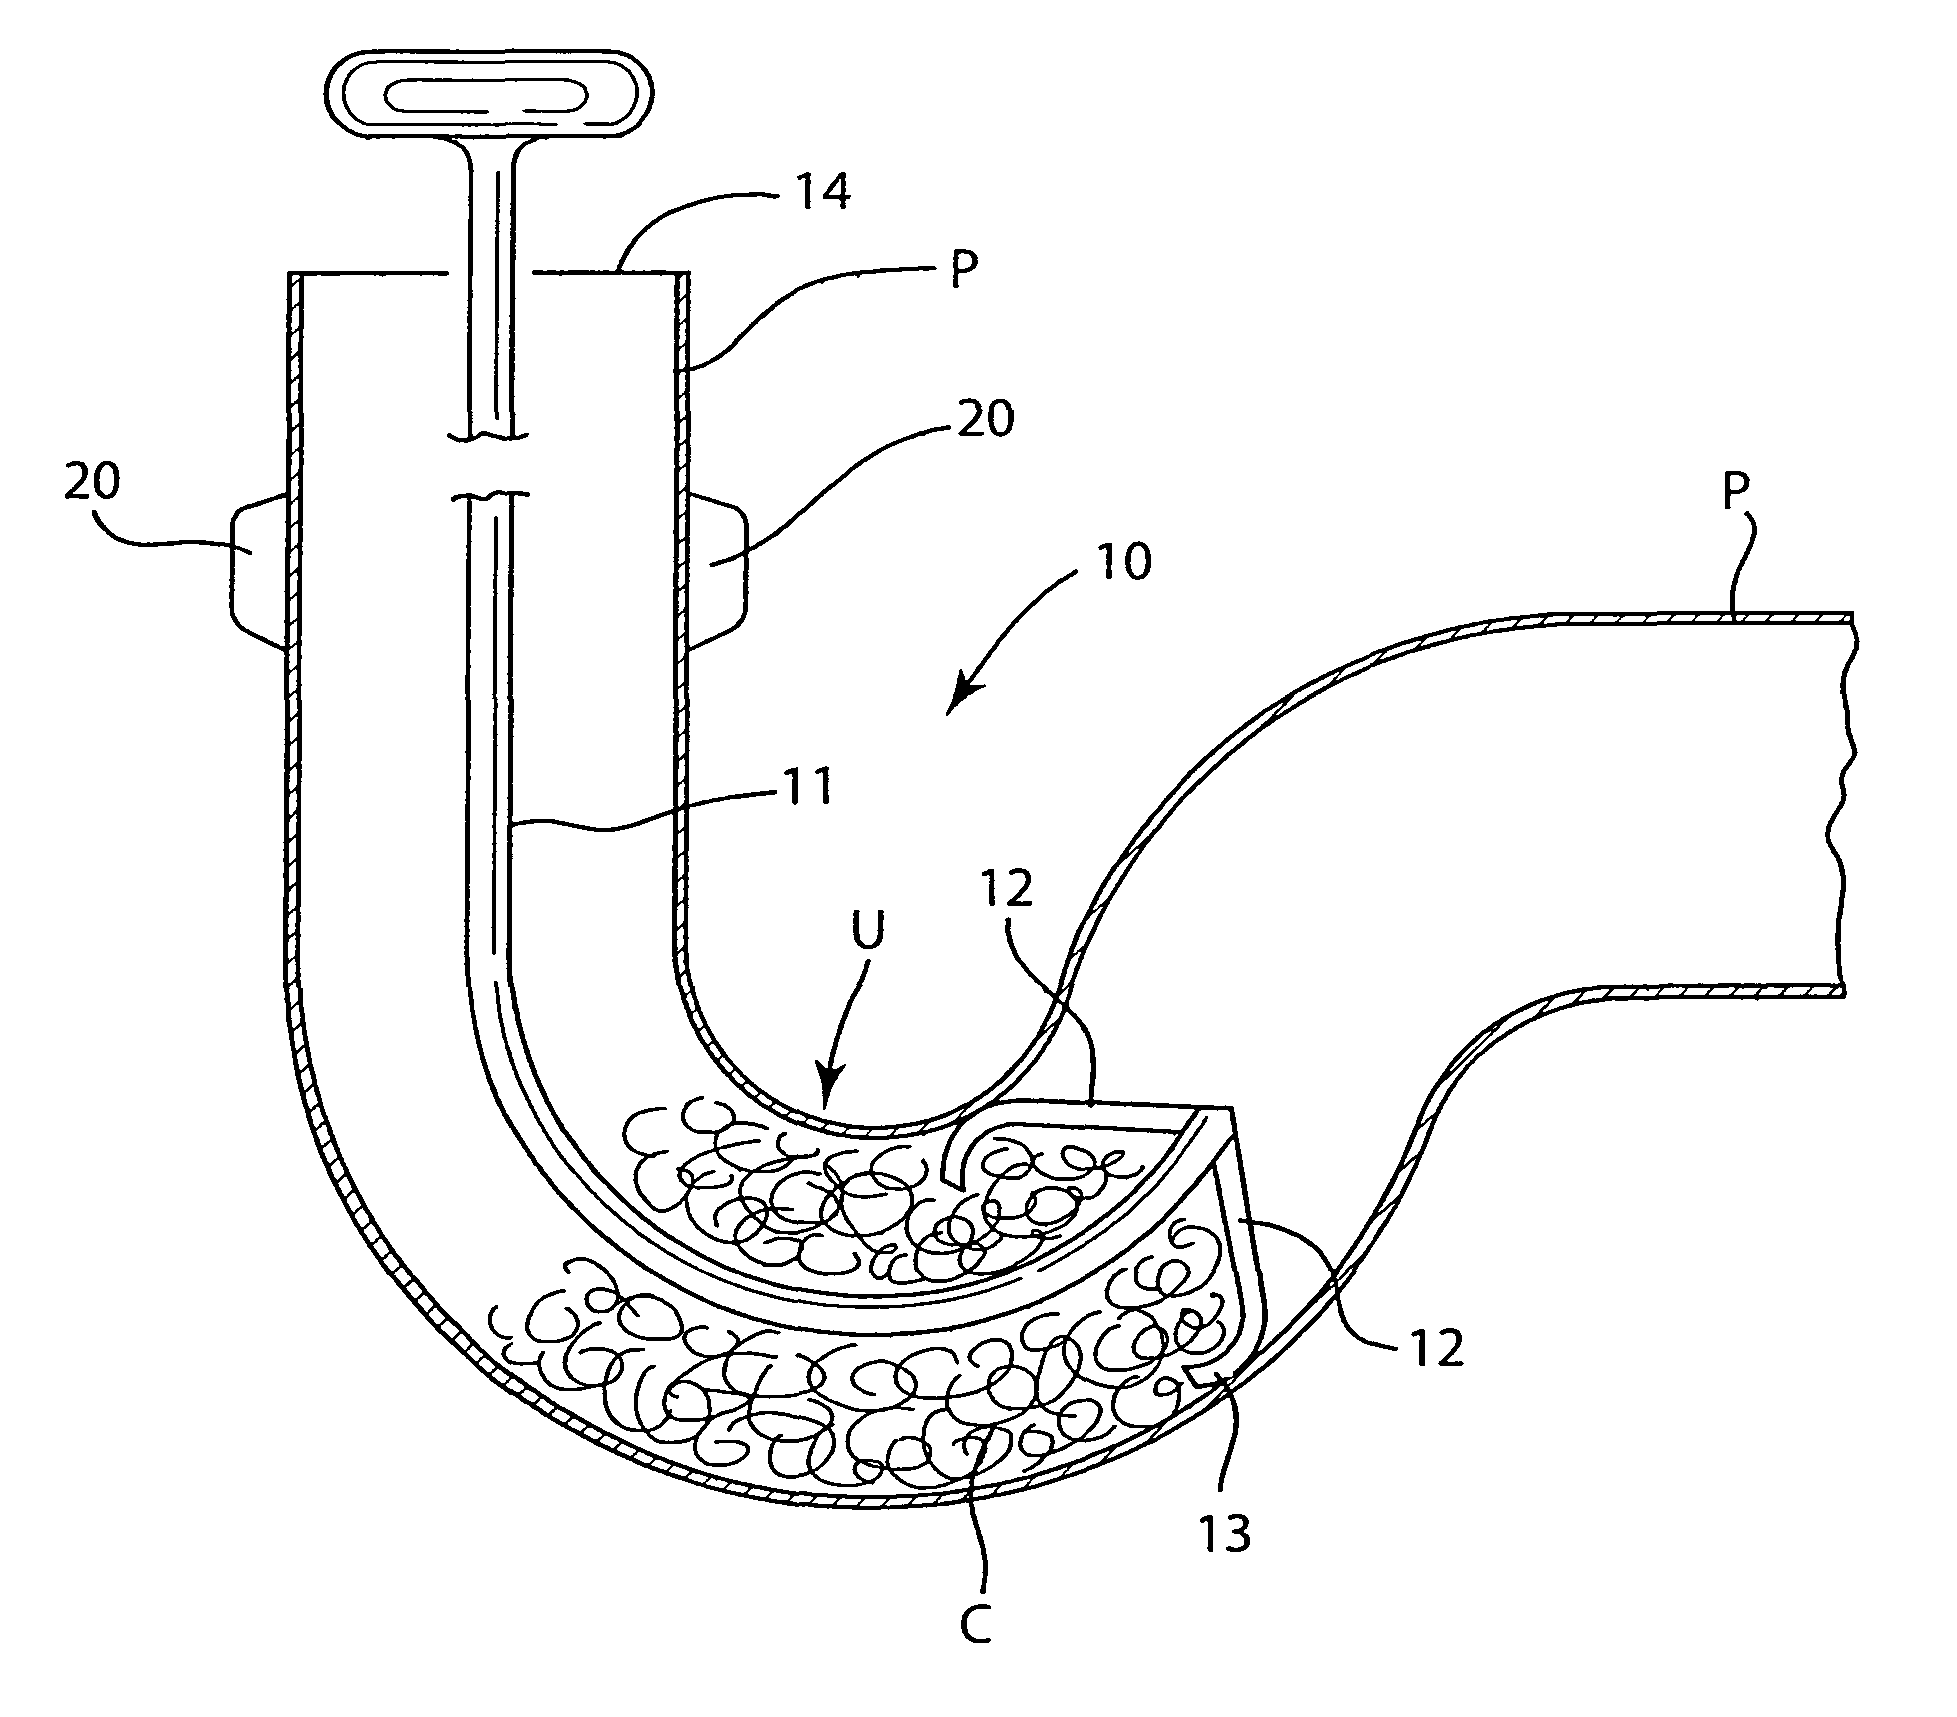 Drain pipe cleaning device and method